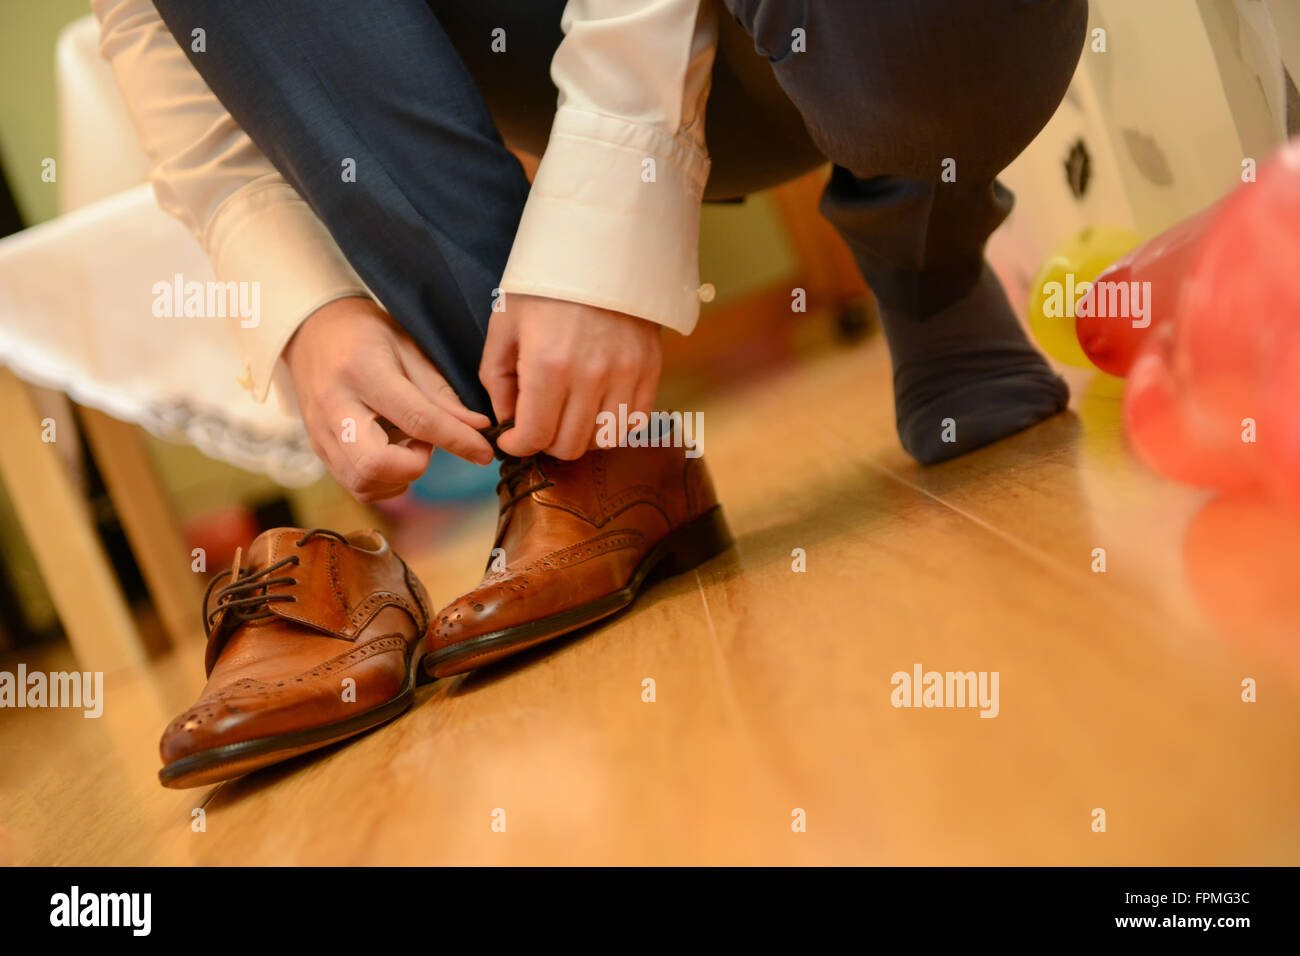 Man tied shoelace in natural light Stock Photo